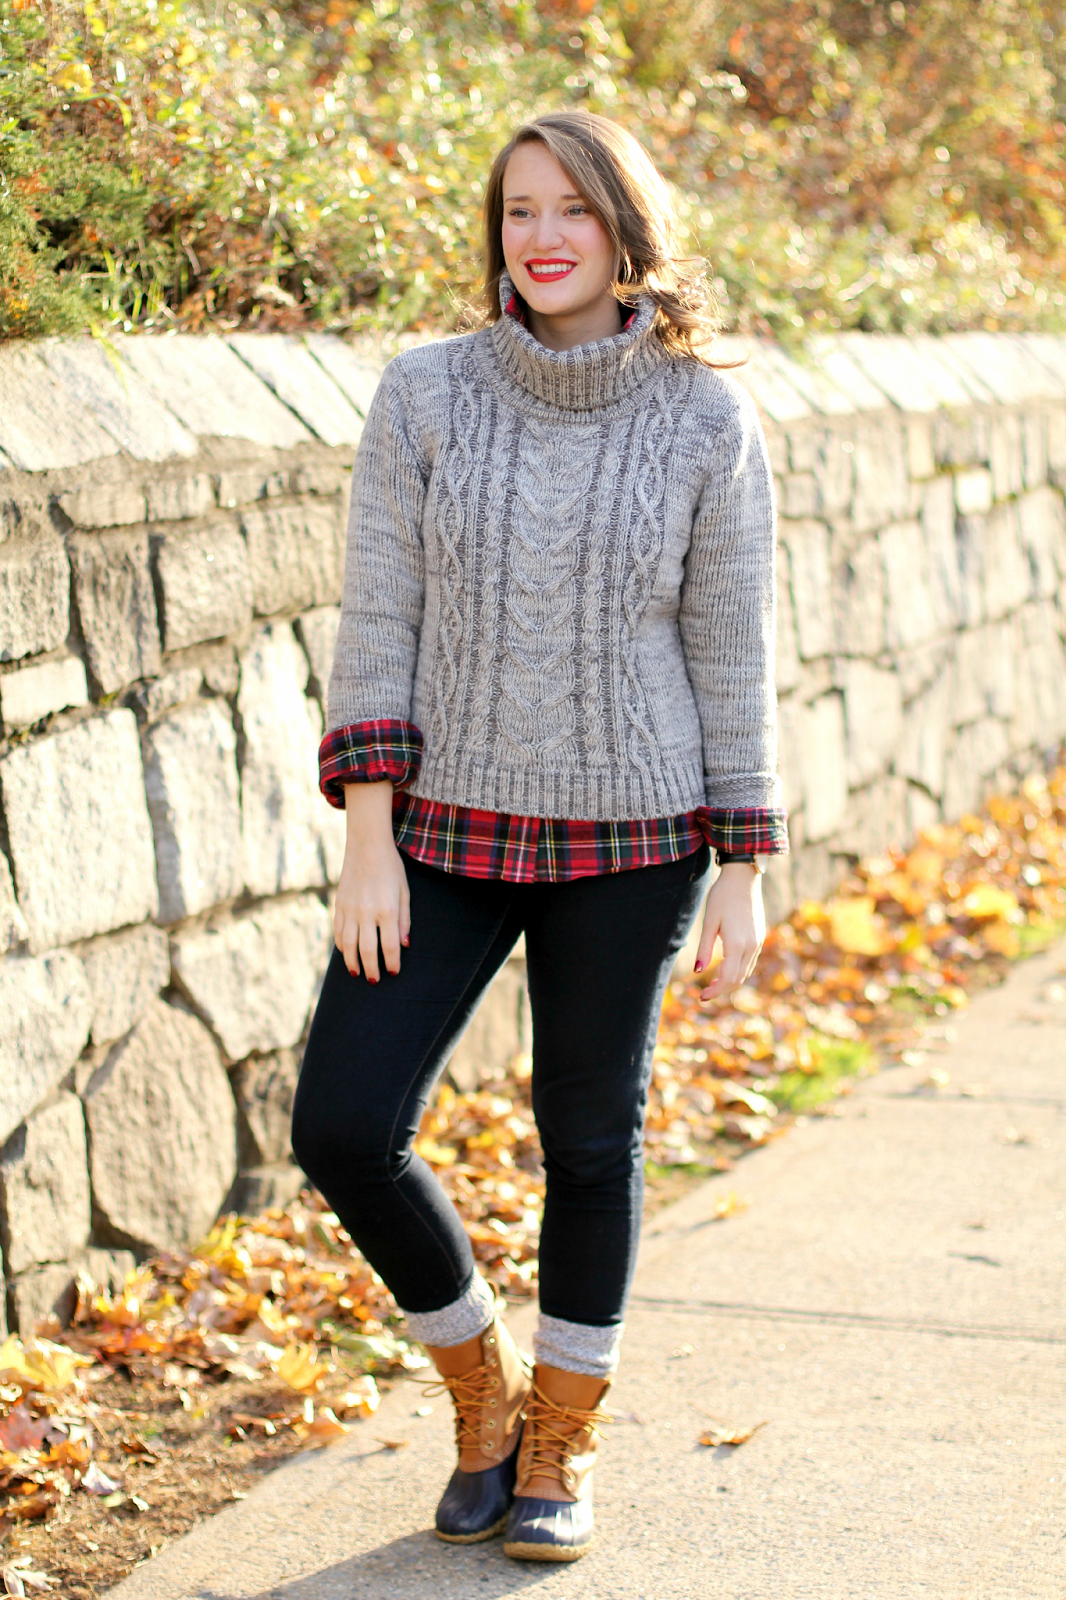 How to Wear L.L. Bean Duck Boots How to Wear LL Bean Duck Boots by popular New York fashion blogger Covering the Bases